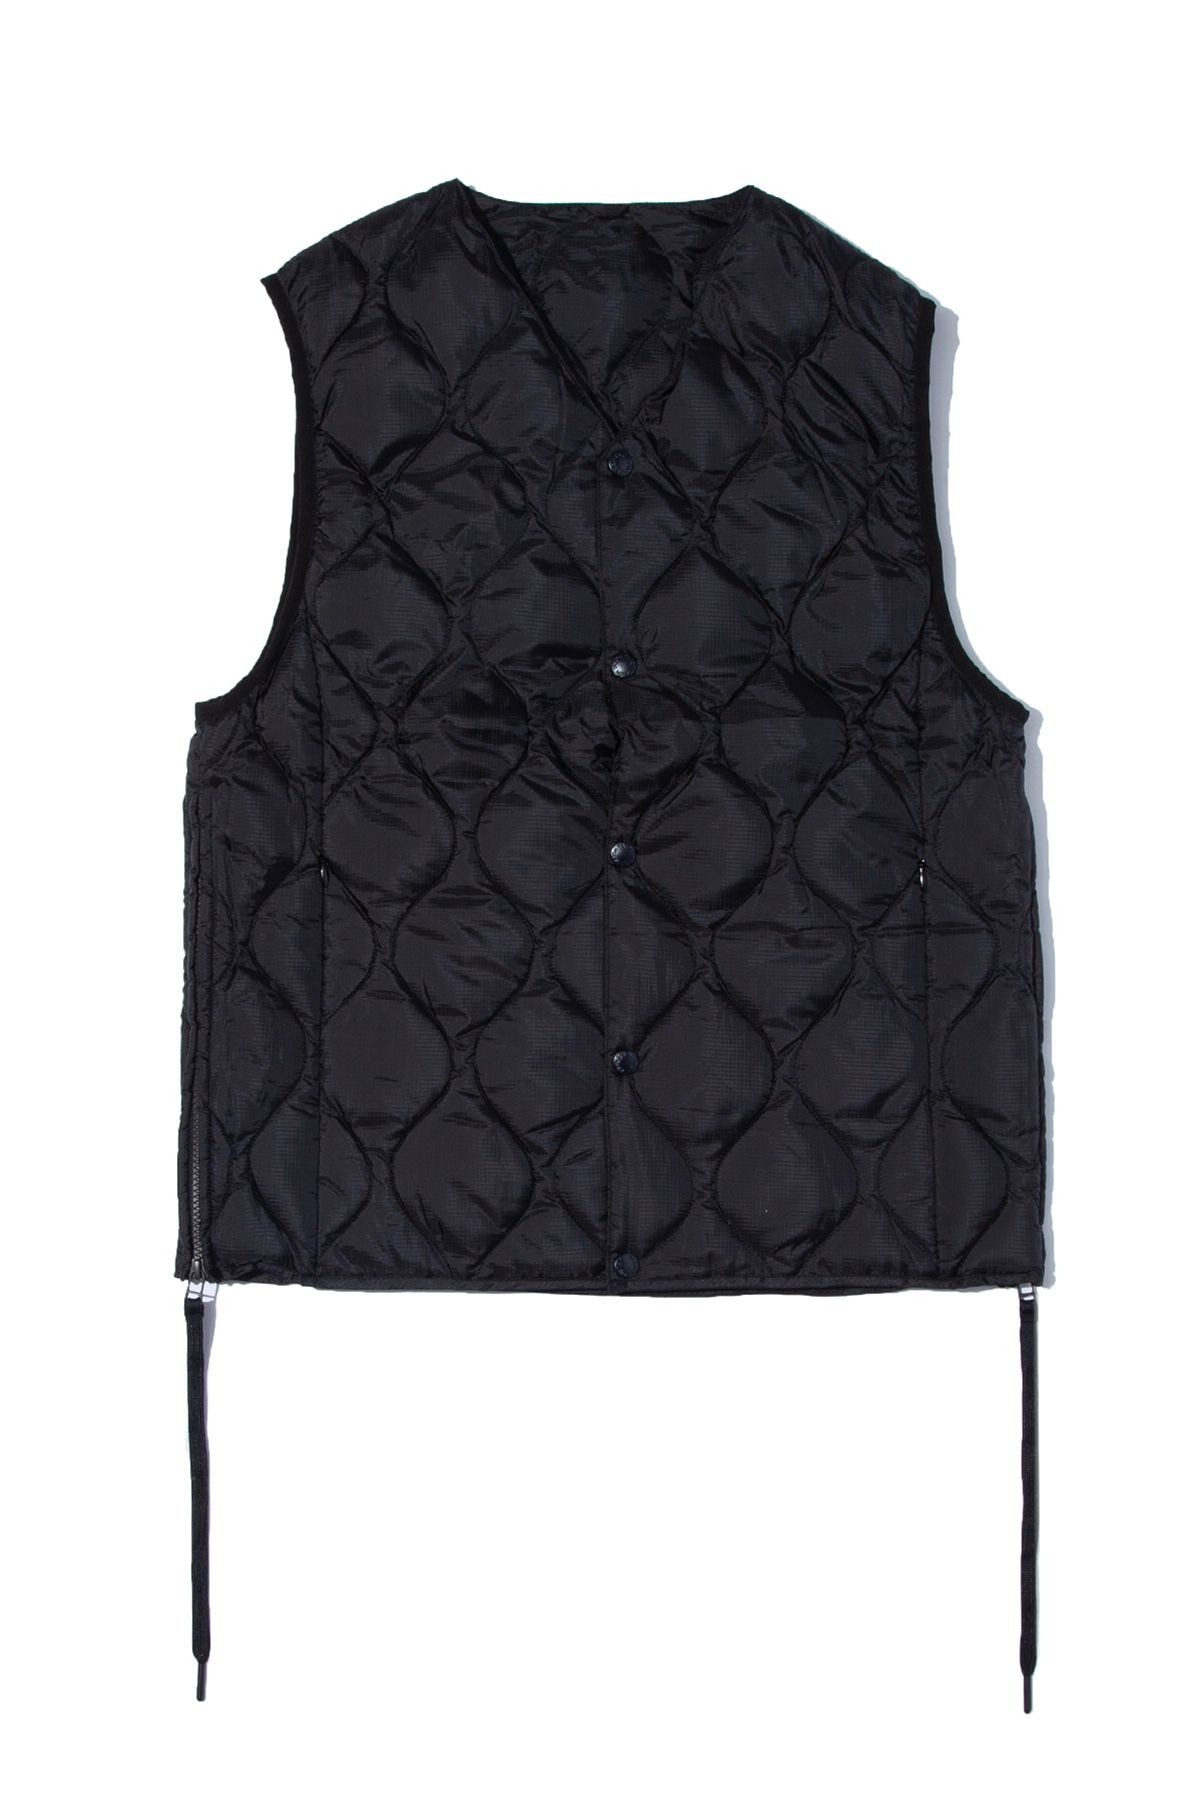 F/CE. - TAION BY F/CE. PACKABLE DOWN VEST -black- 23aw